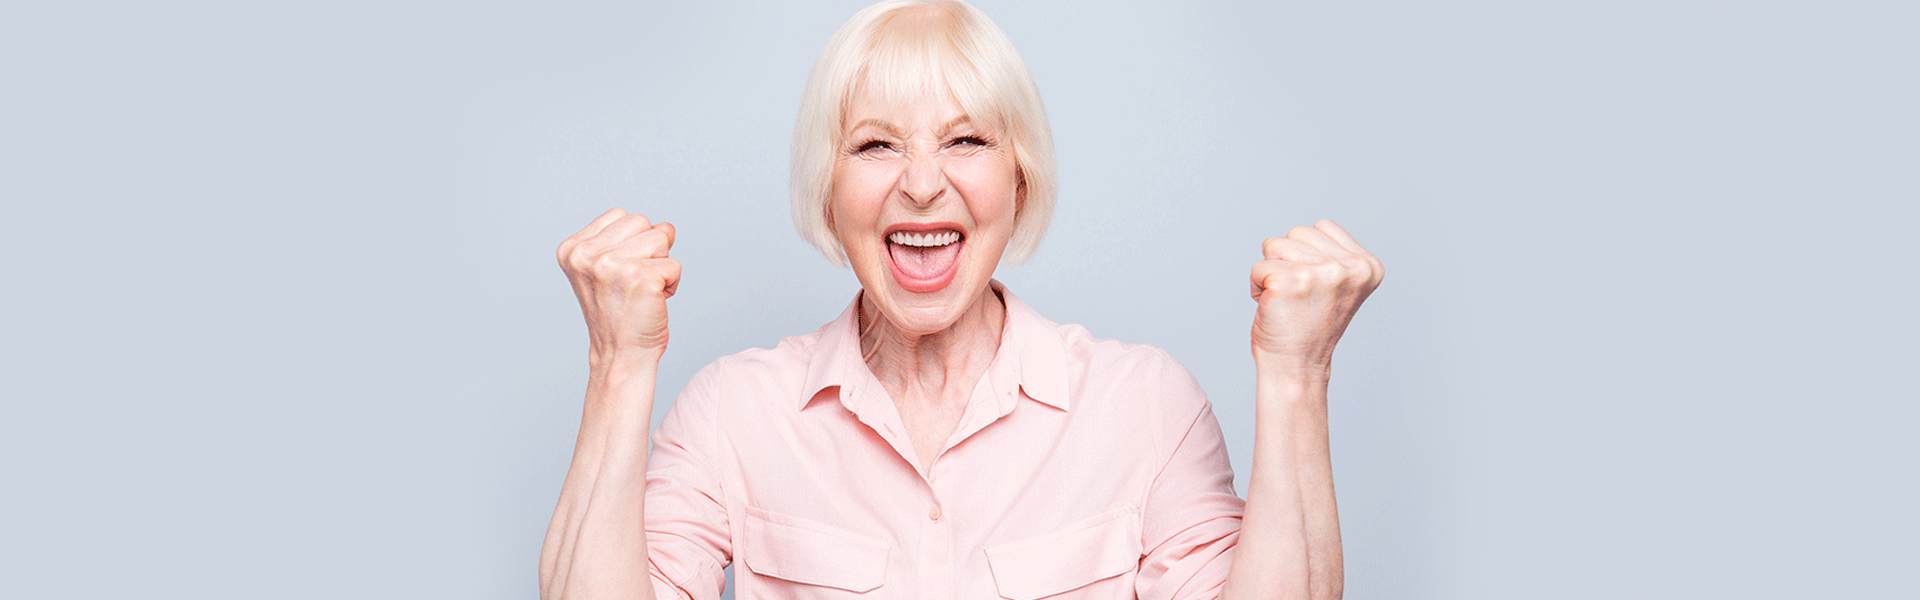 The Reality about Teeth Replacement Options like Dentures